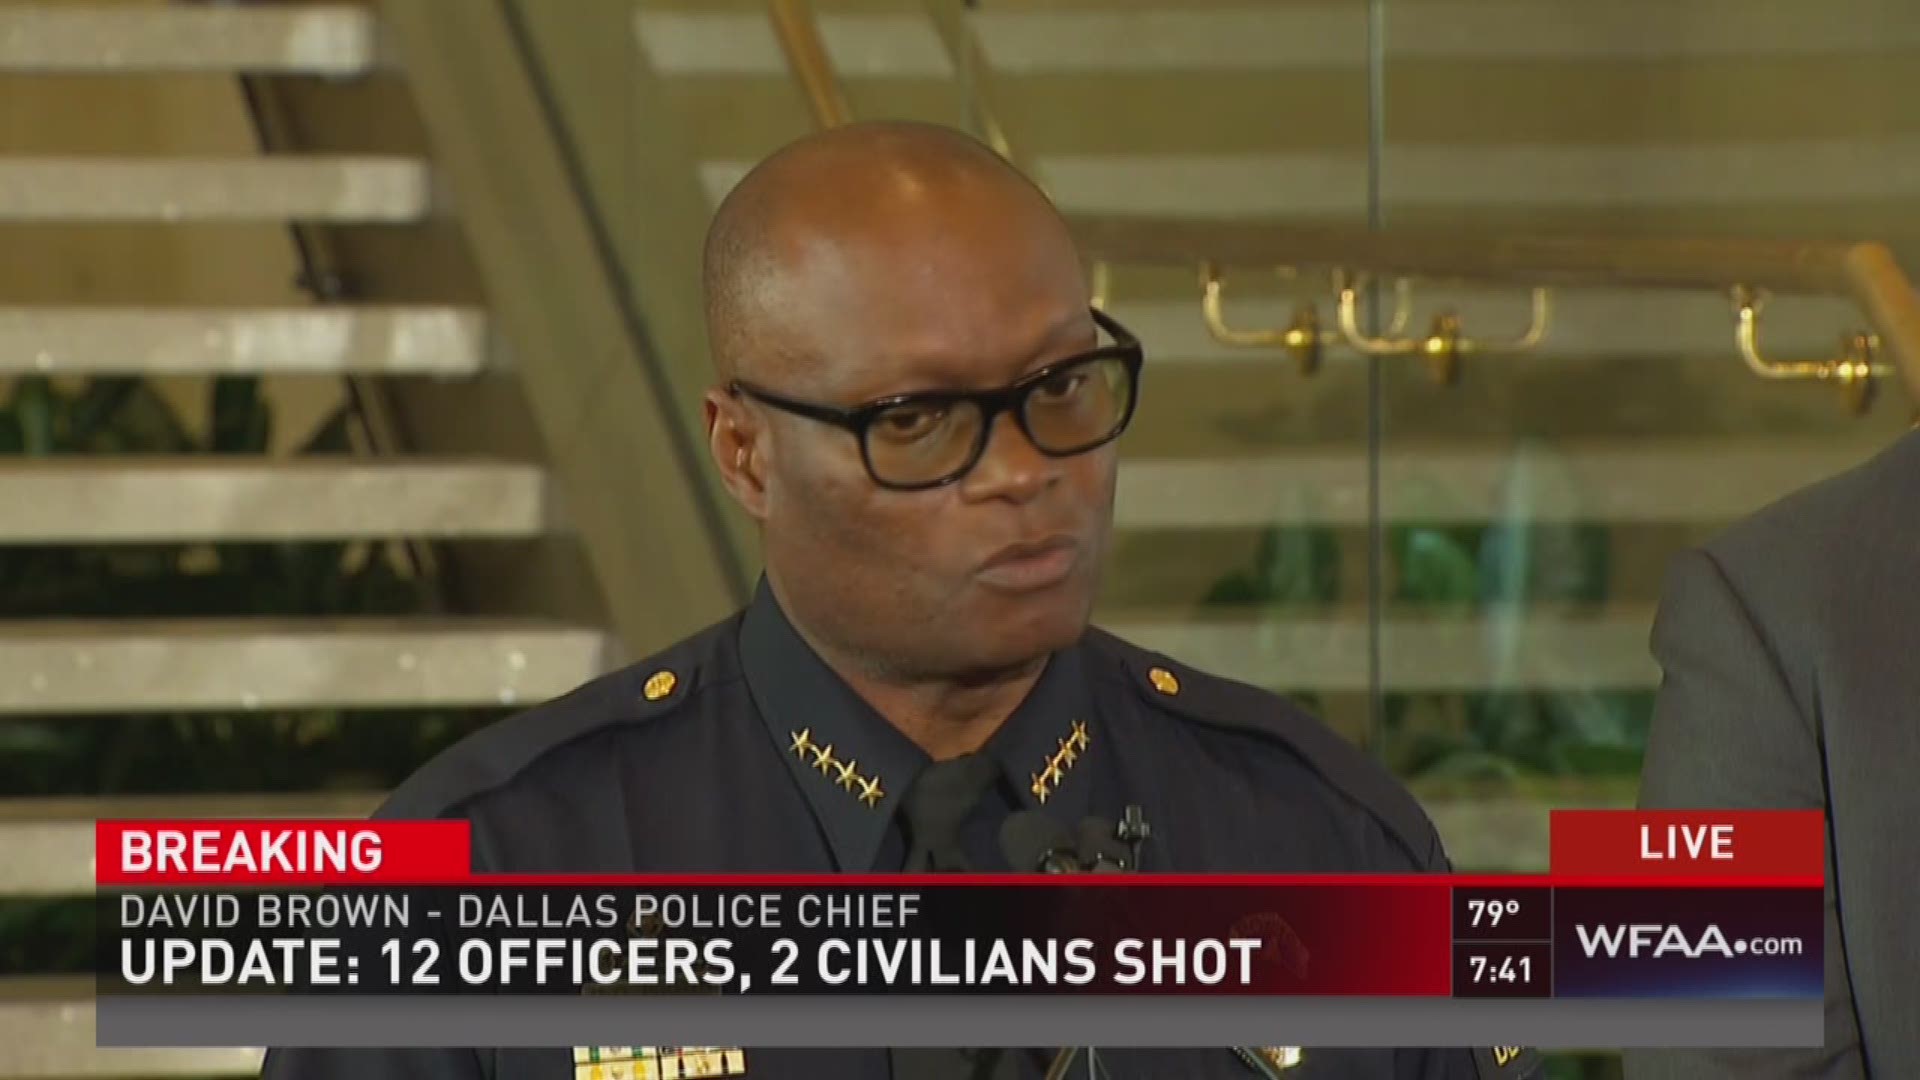 Dallas Police Chief: The suspect said he was upset about Black Lives Matter and the recent police shootings and wanted to kill white people.